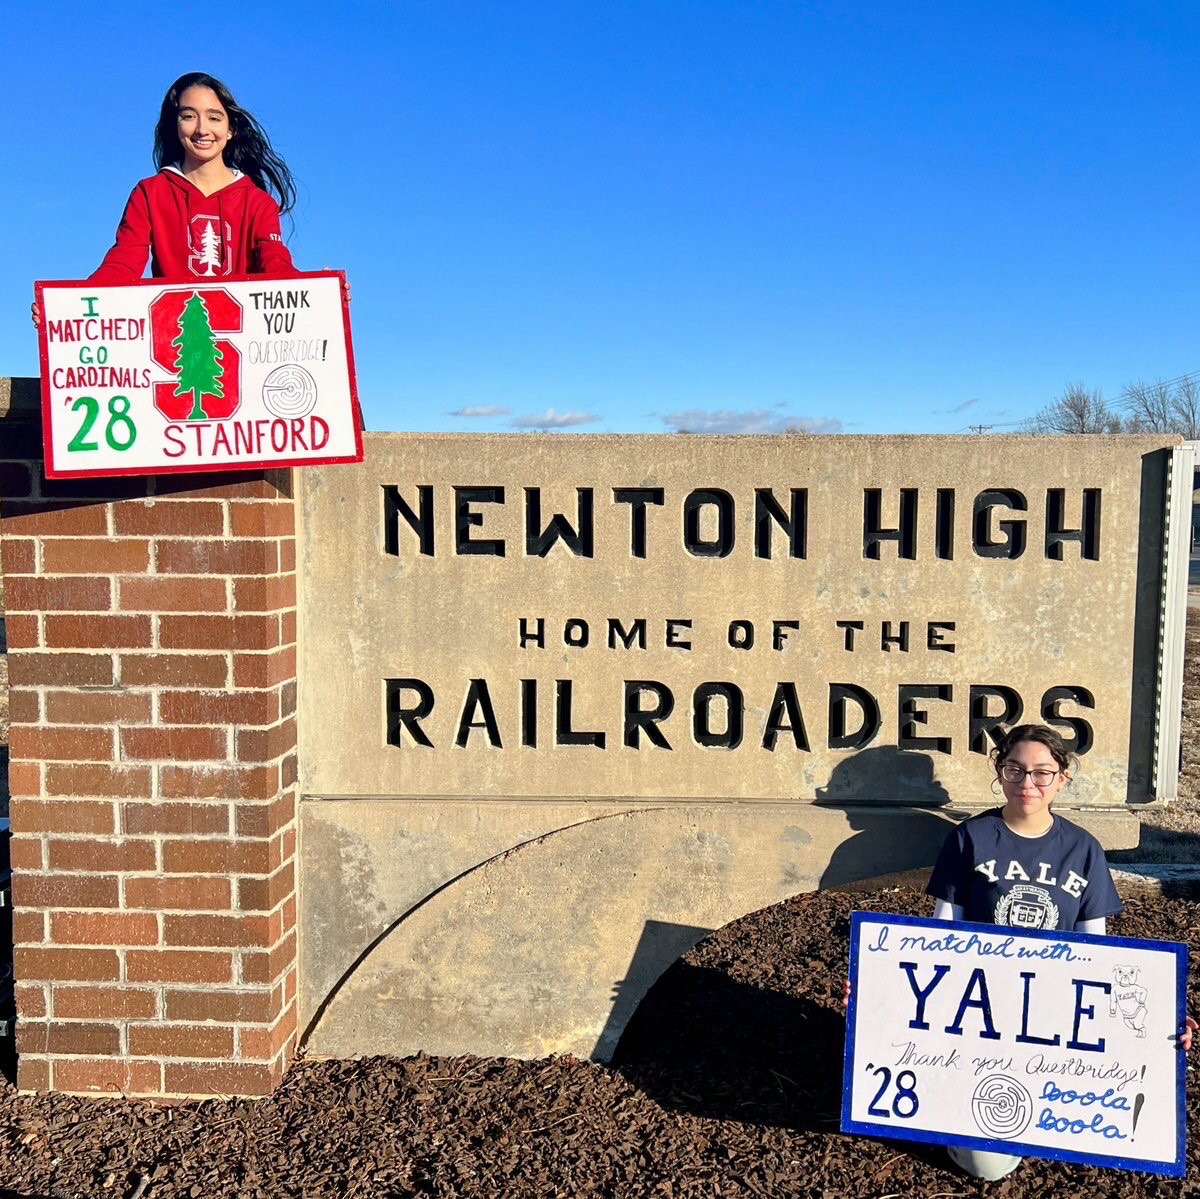 Seniors+Natalie+%28top+left%29+and+Anahi+Sanchez+%28bottom+right%29+pose+with+handmade+posters+outside+of+Newton+High+School+to+celebrate+their+college+acceptances.